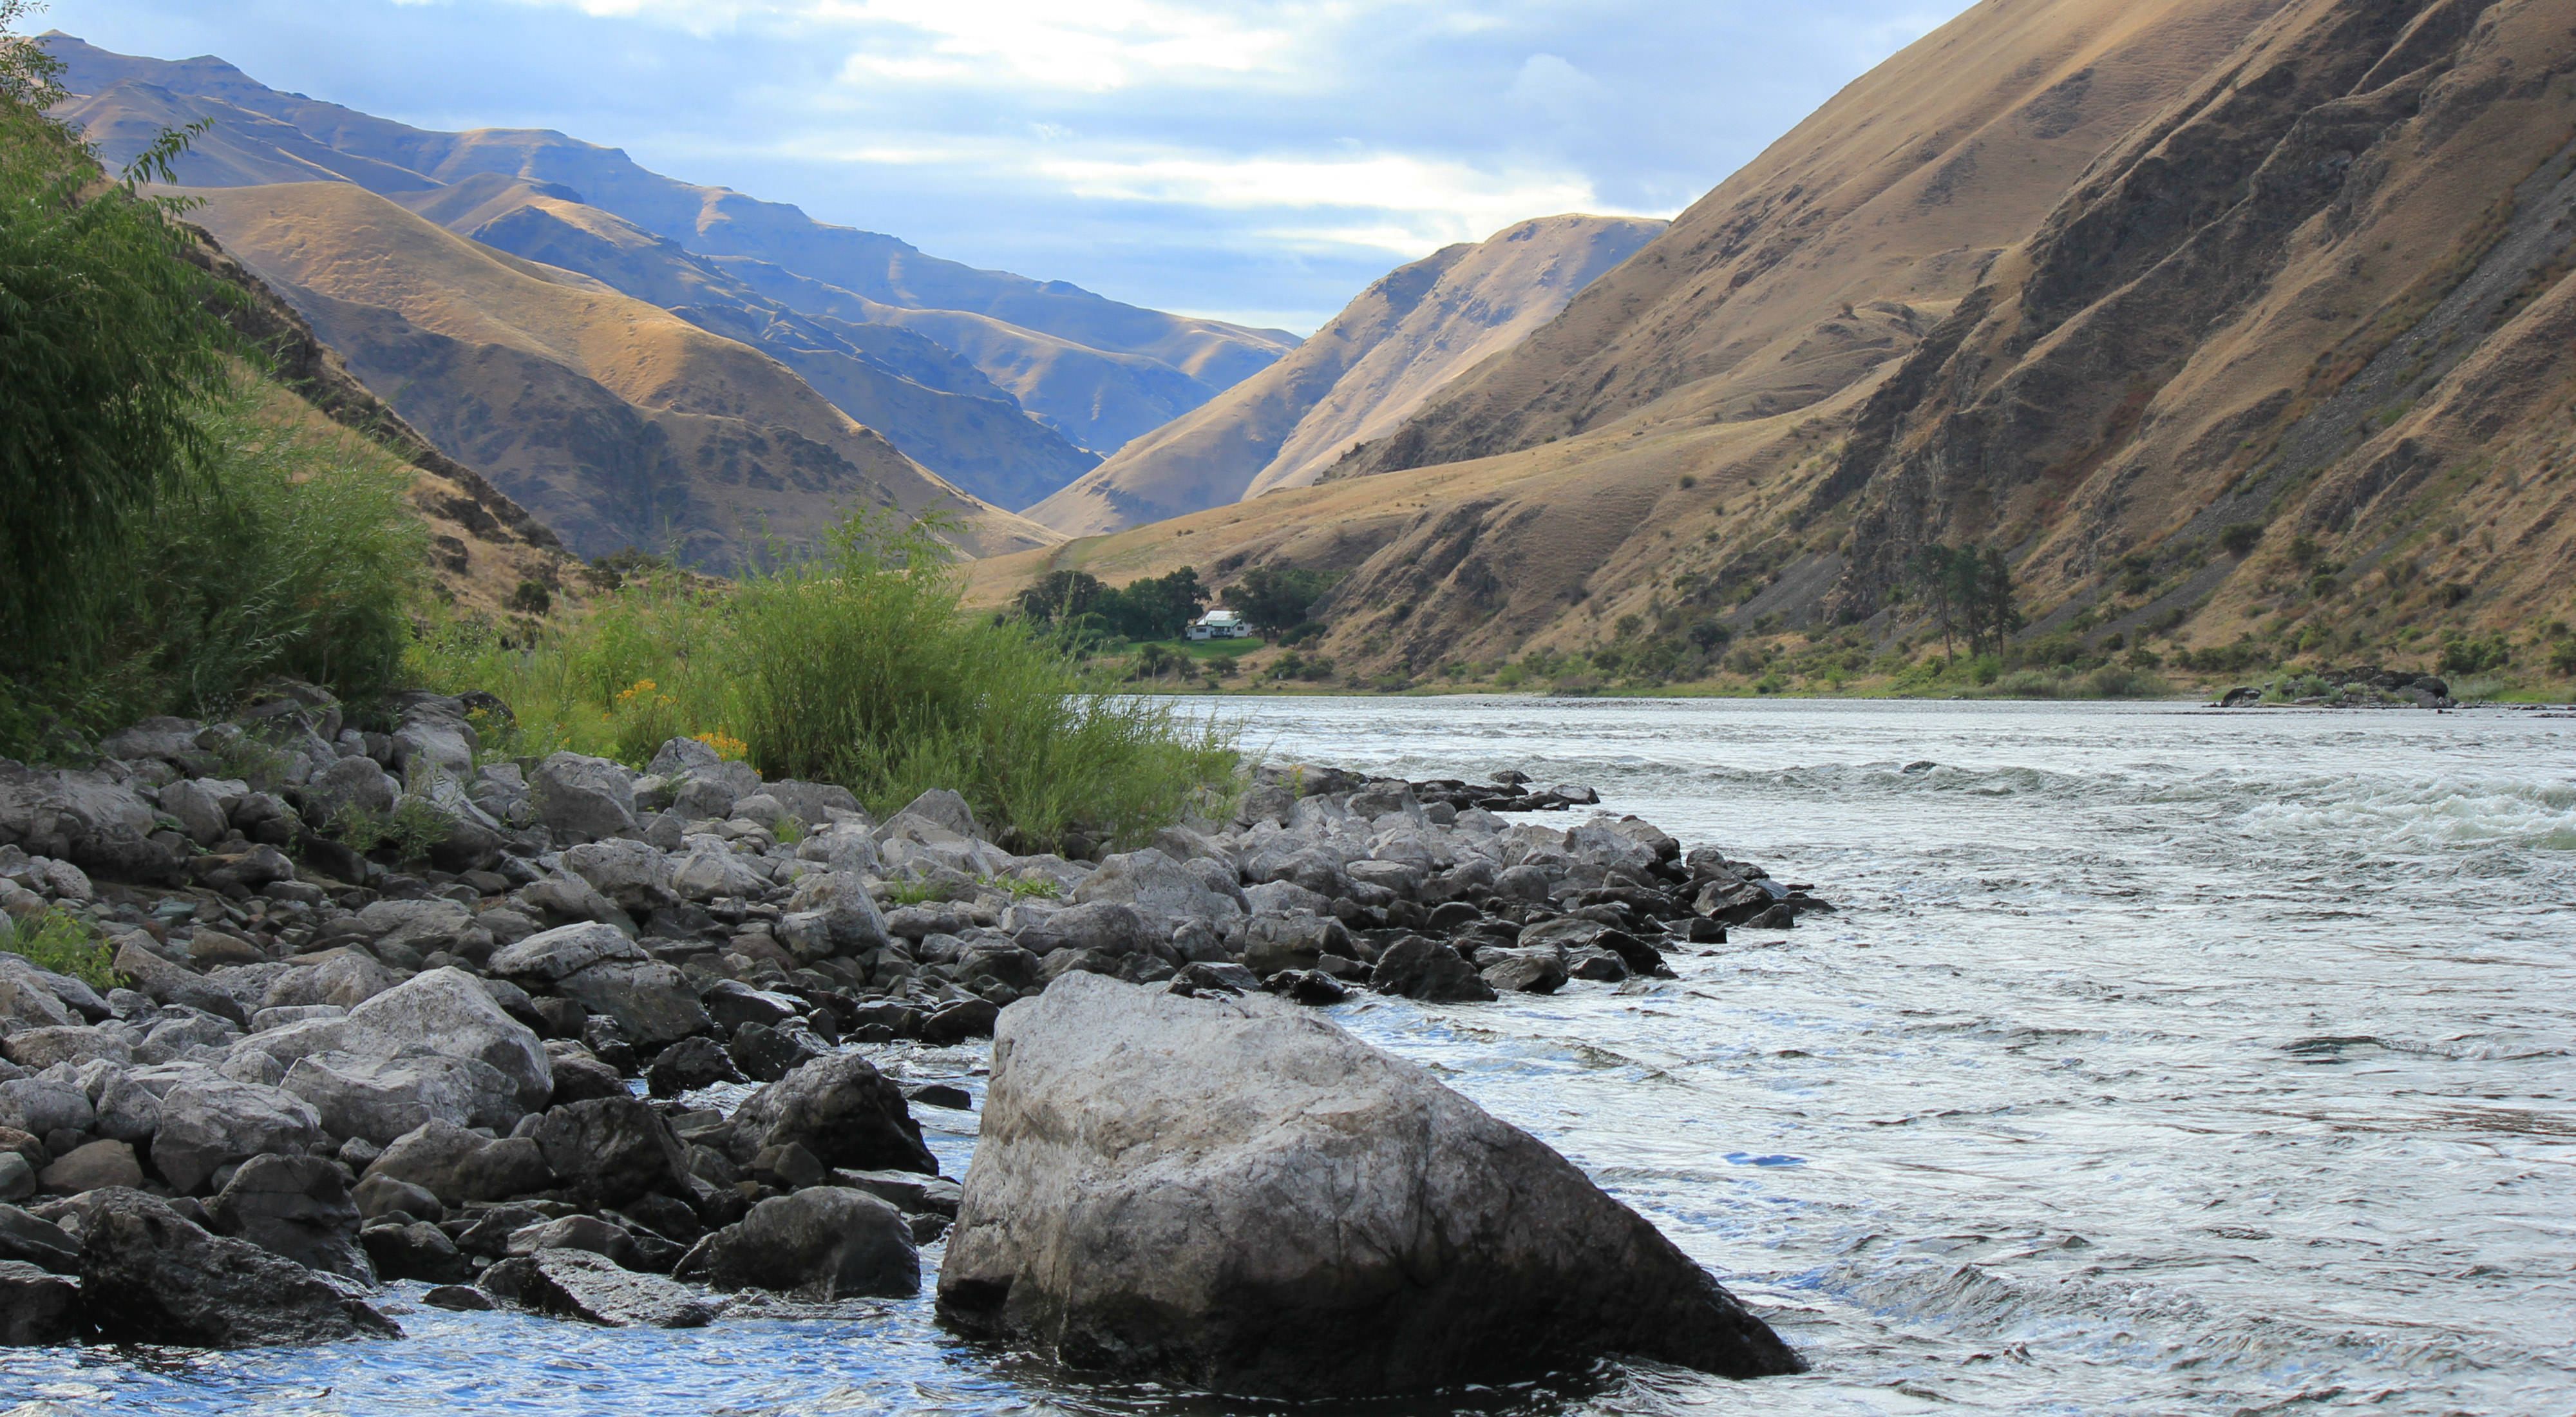 View of Hells Canyon from the river banks at the Garden Creek Preserve